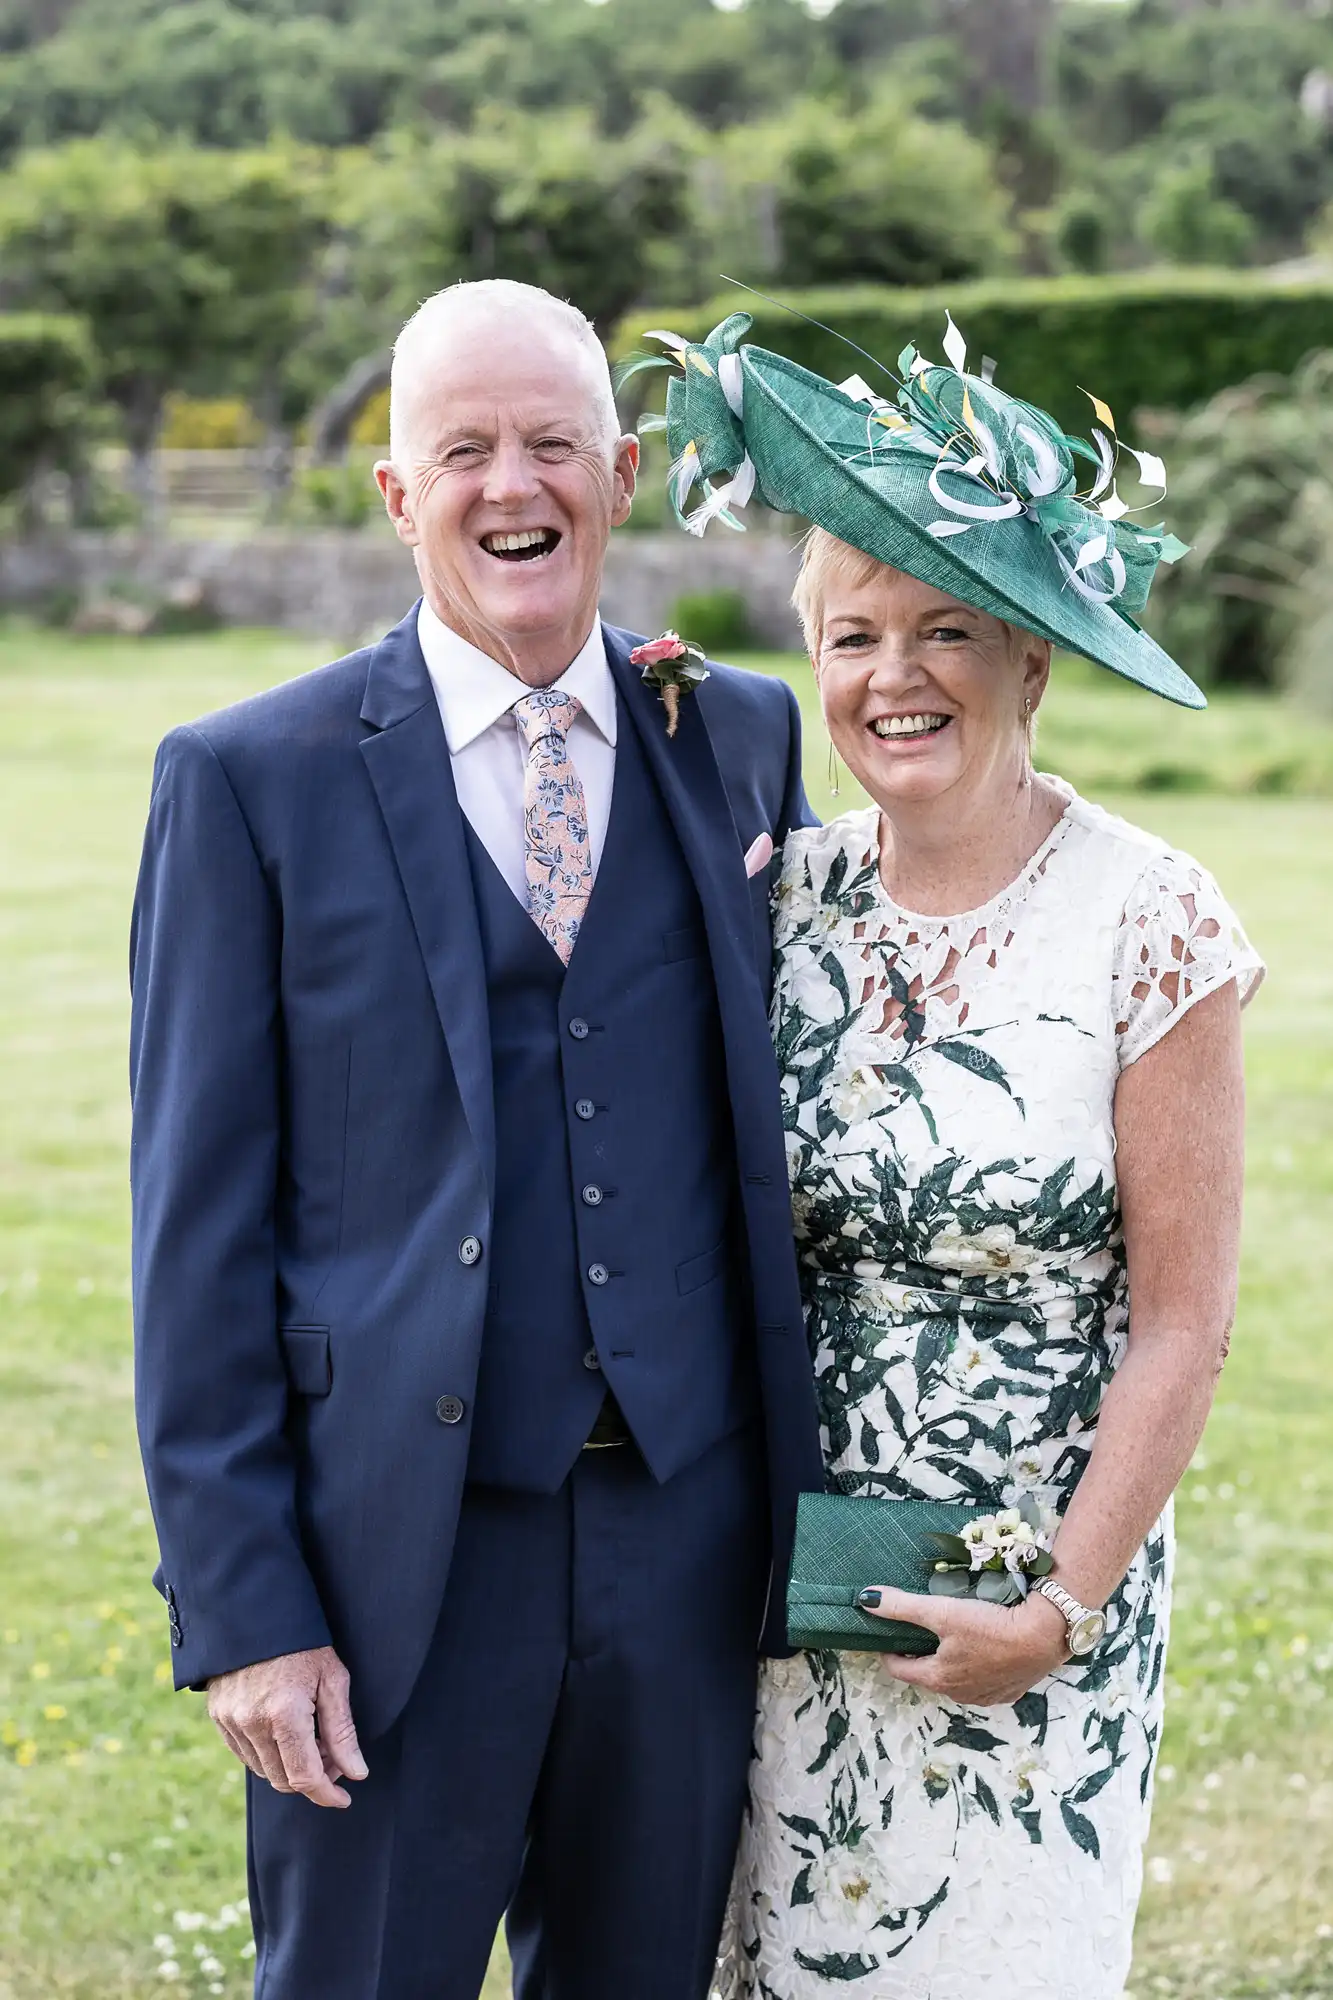 An older couple in formal wear smiling at a wedding event; the man in a navy suit and the woman in a floral dress and a large green hat.